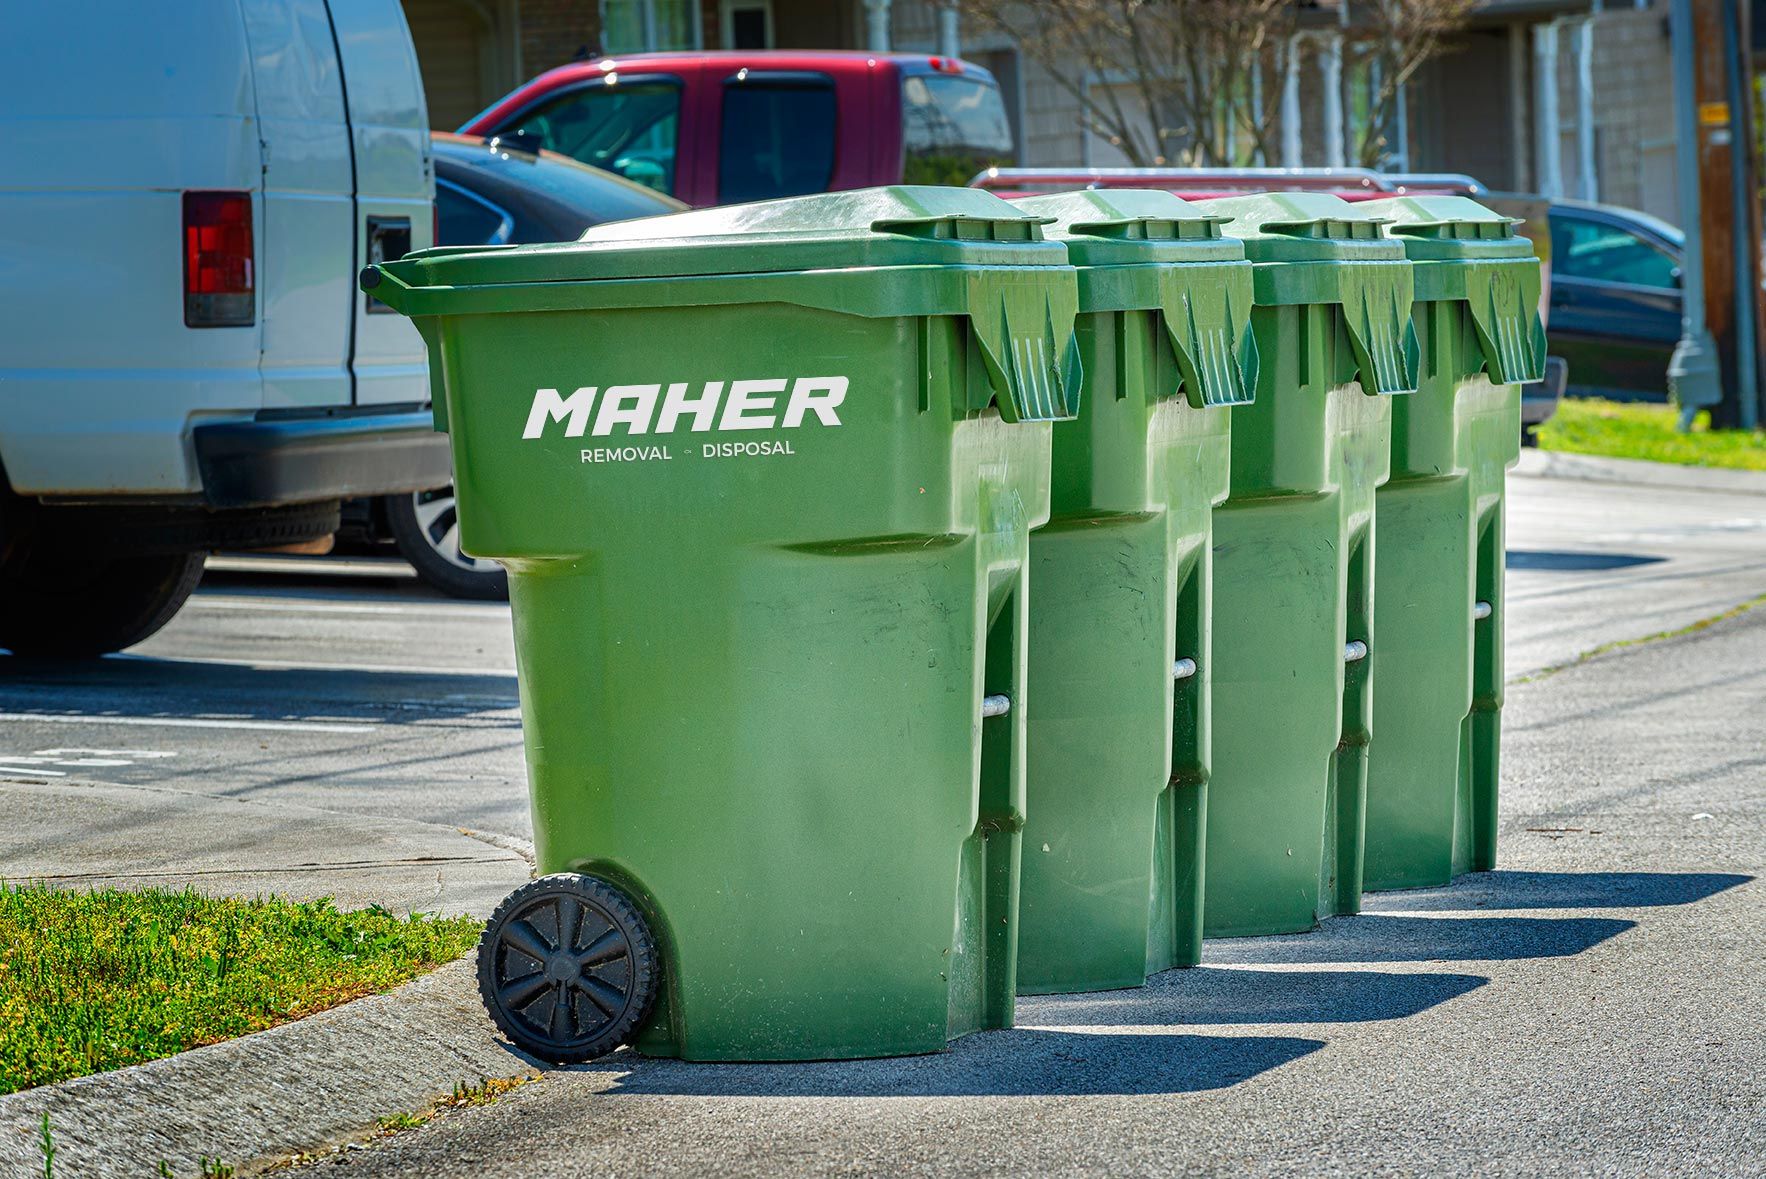 Maher Removal & Disposal is a garbage collection & waste management company for residential & commercial properties.